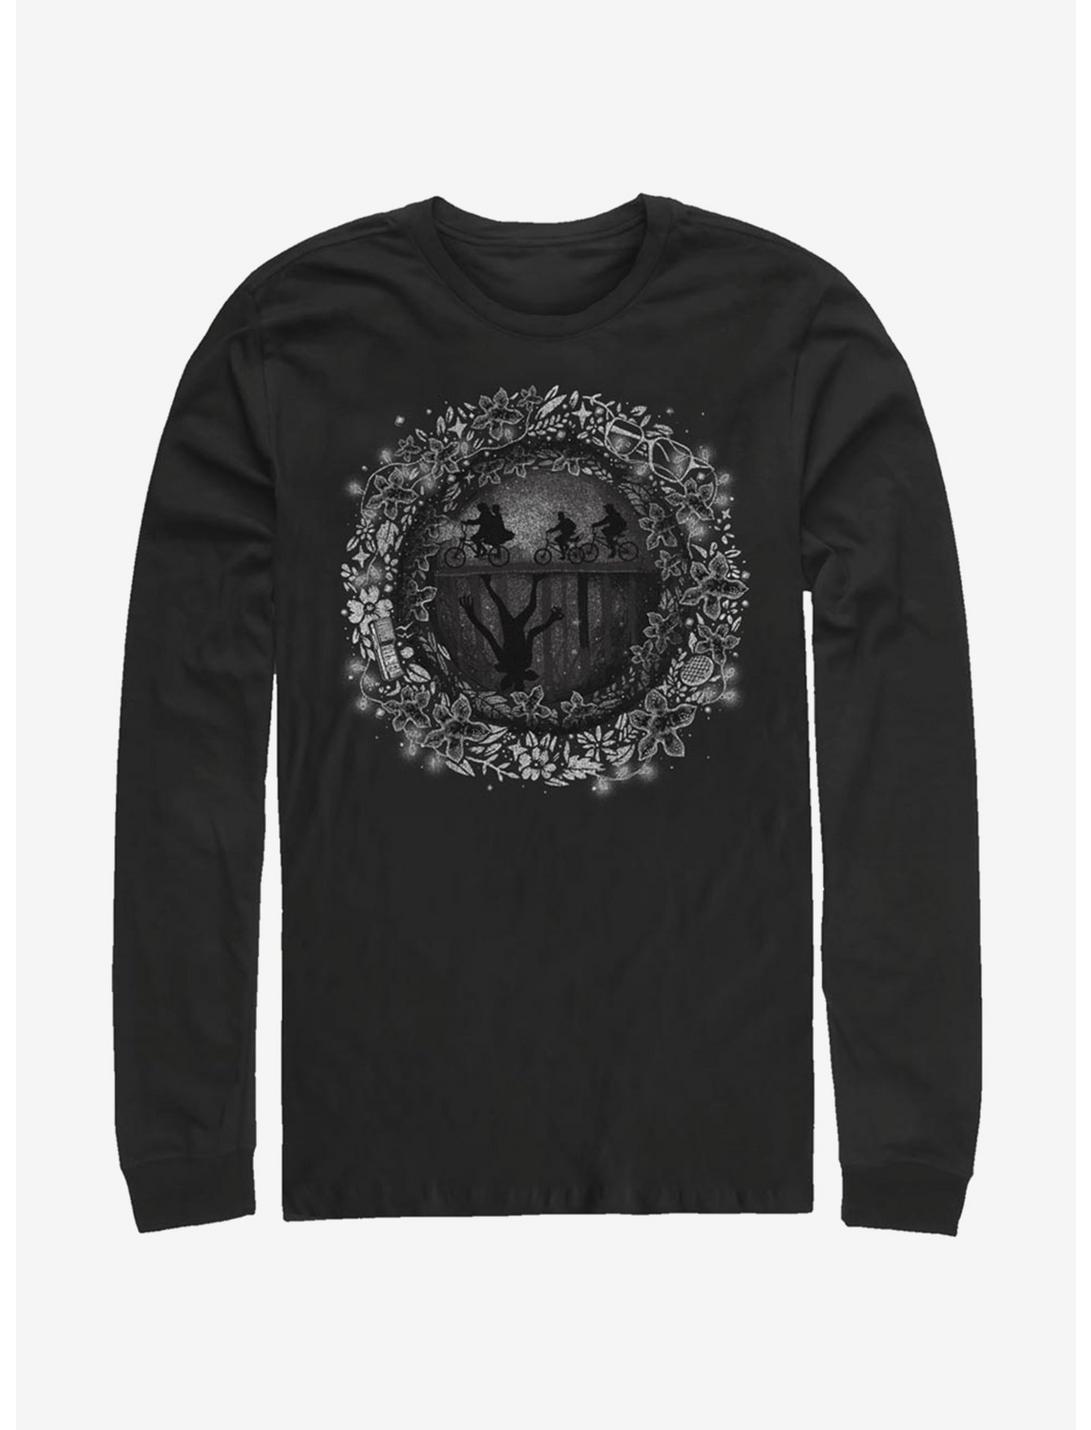 Stranger Things Into The Upside Down Long-Sleeve T-Shirt, BLACK, hi-res